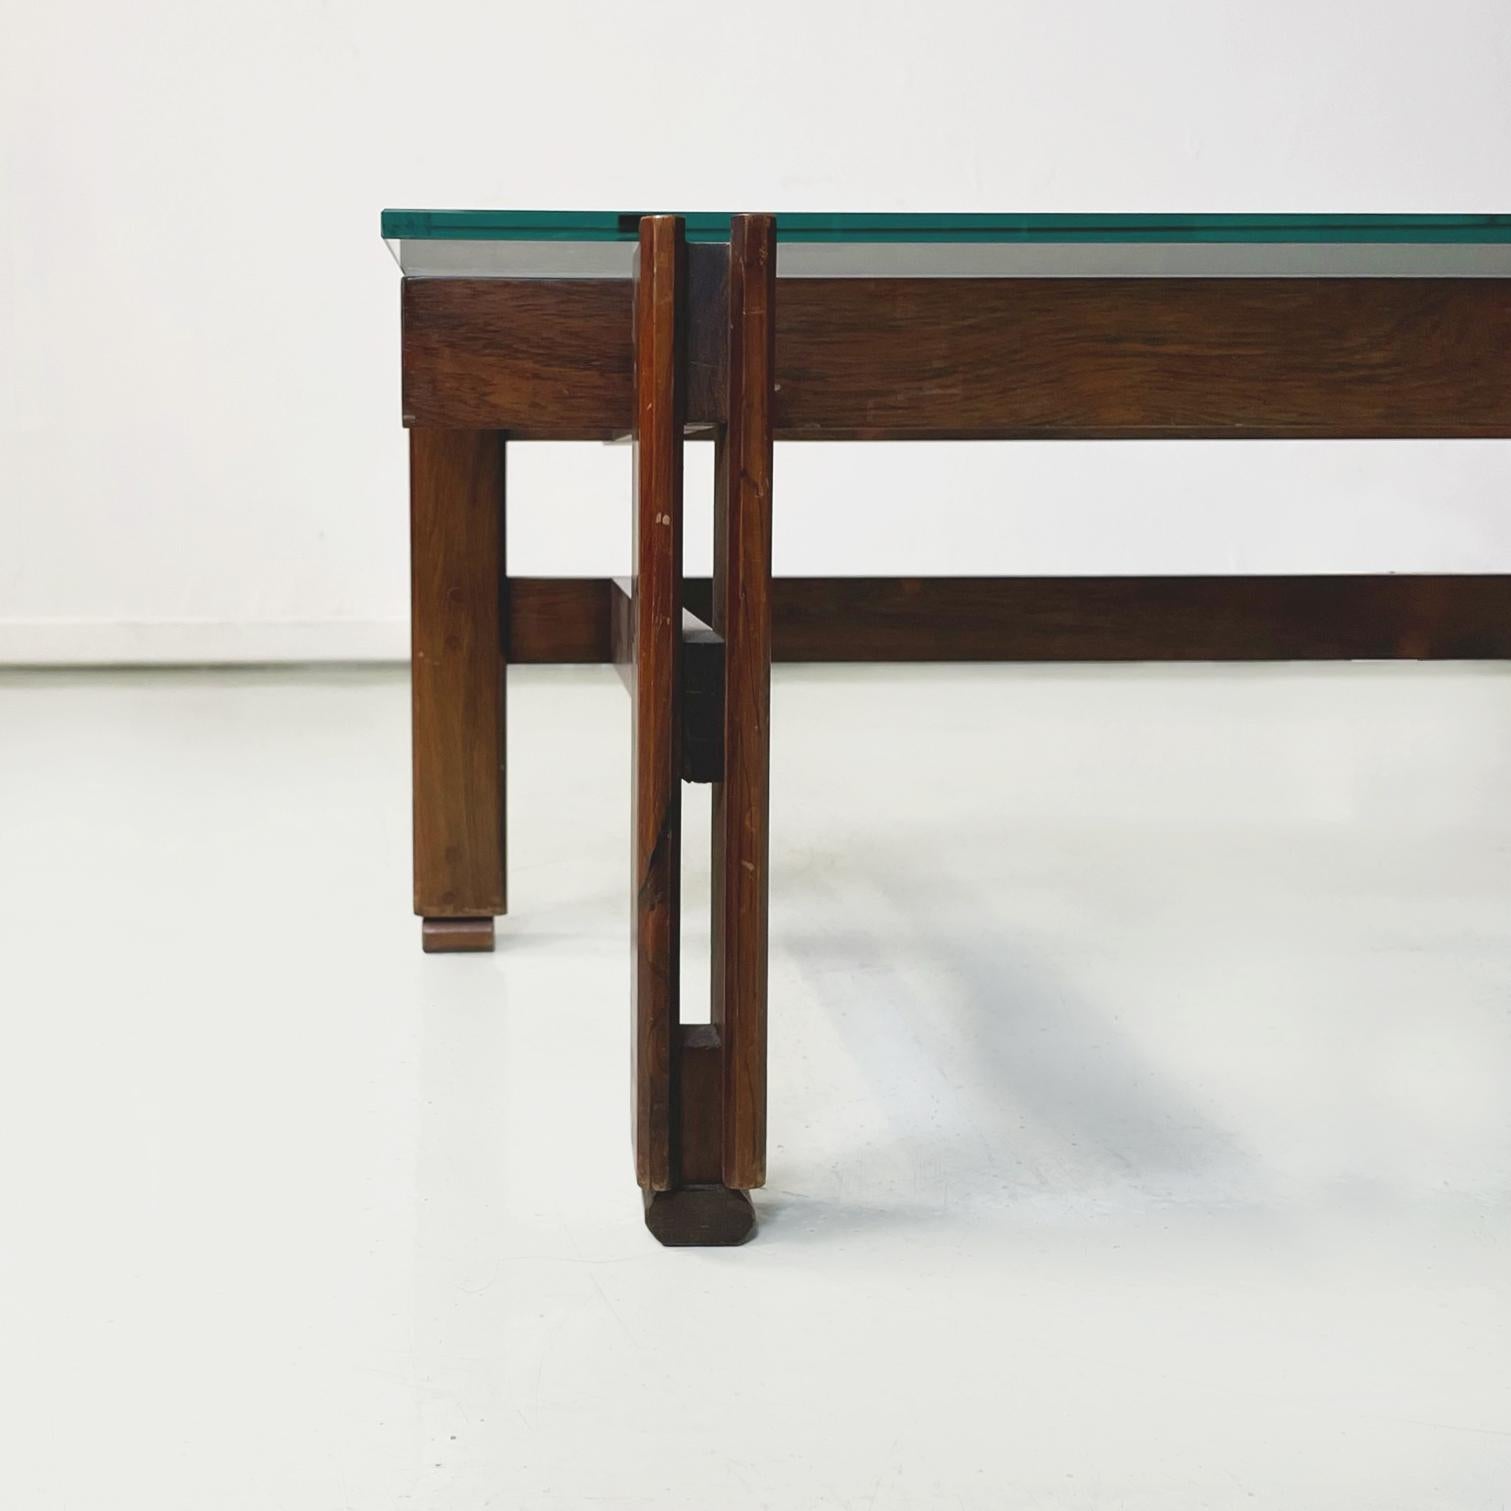 Glass Italian Mid-Century Coffee Table 751 by Ico and Luisa Parisi for Cassina, 1960s For Sale